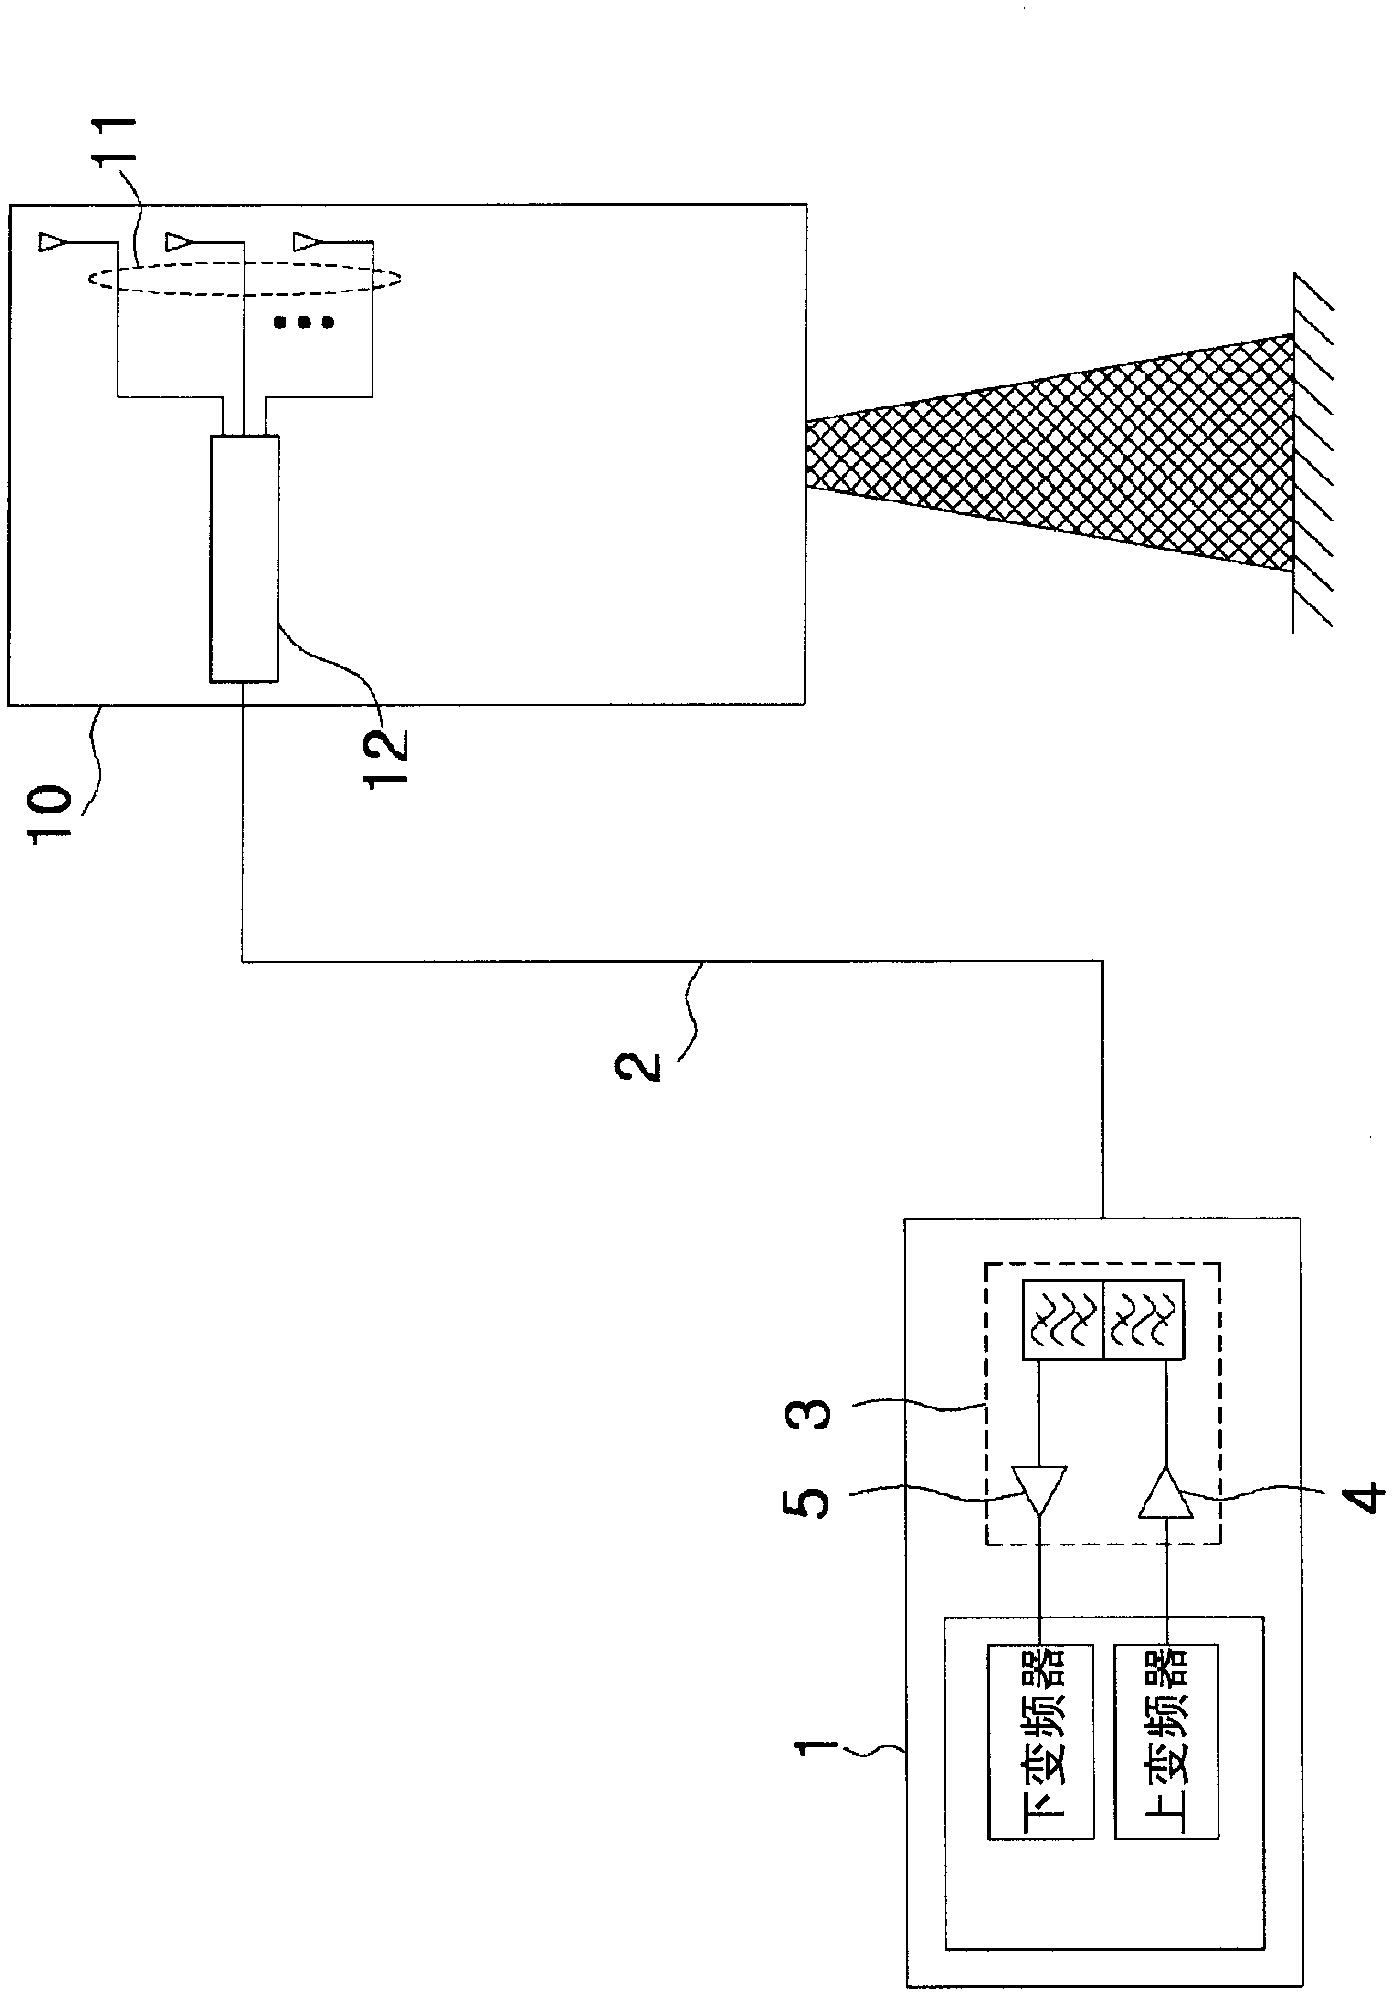 Base station antenna device embedded with transmission and receiving module